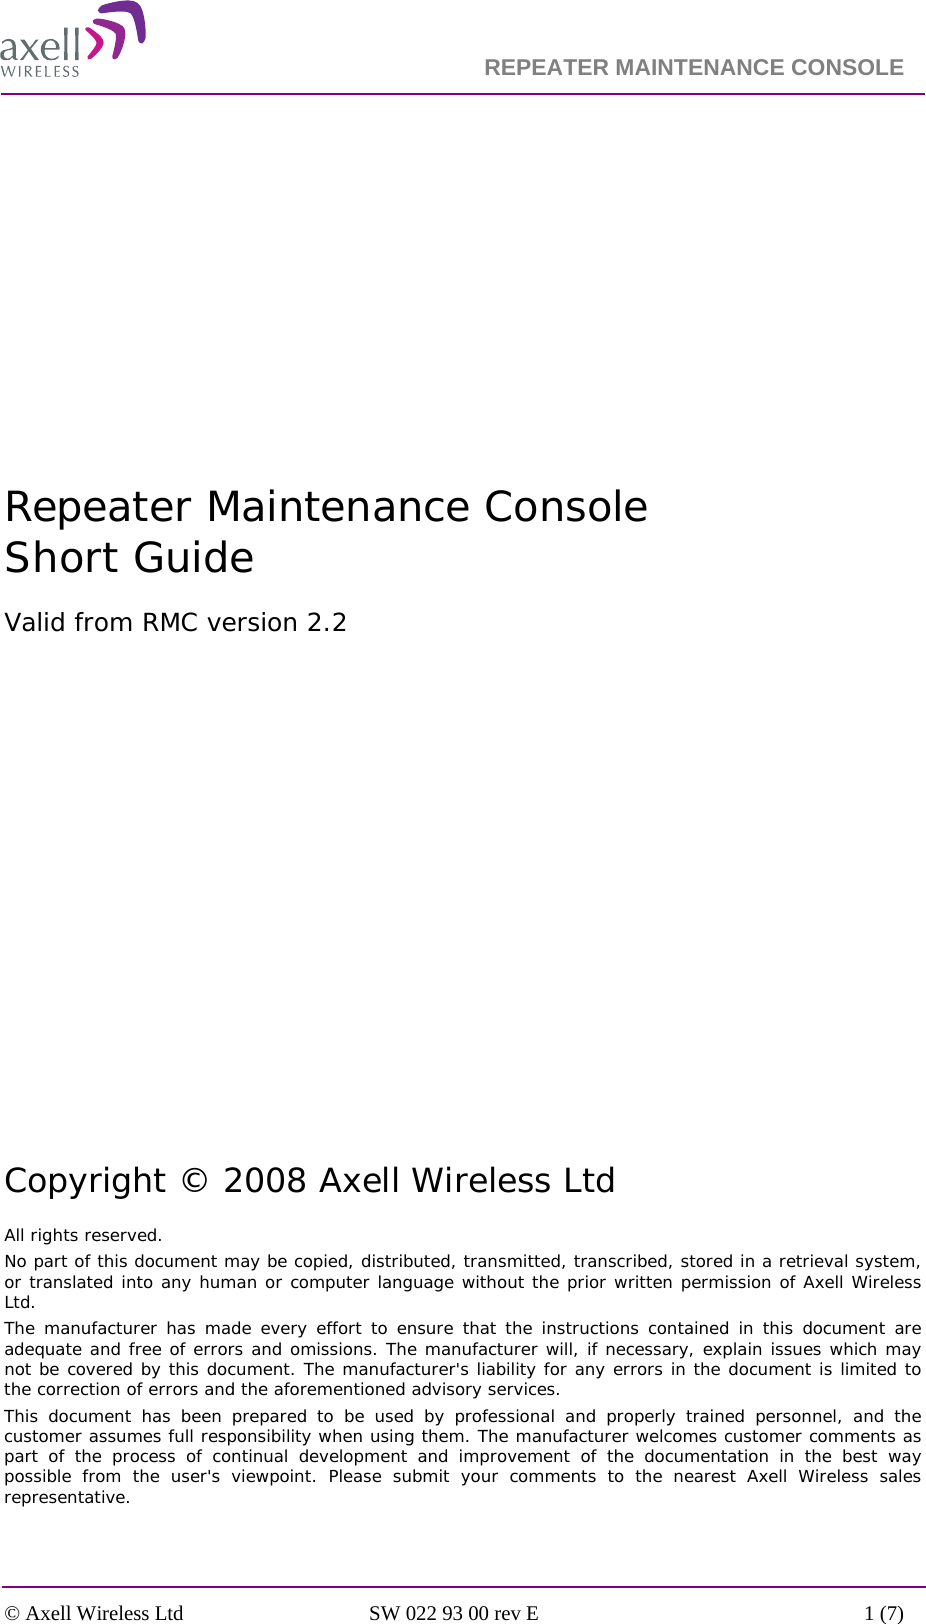                                                                    REPEATER MAINTENANCE CONSOLE    © Axell Wireless Ltd  SW 022 93 00 rev E  1 (7)          Repeater Maintenance Console Short Guide Valid from RMC version 2.2               Copyright © 2008 Axell Wireless Ltd All rights reserved. No part of this document may be copied, distributed, transmitted, transcribed, stored in a retrieval system, or translated into any human or computer language without the prior written permission of Axell Wireless Ltd. The manufacturer has made every effort to ensure that the instructions contained in this document are adequate and free of errors and omissions. The manufacturer will, if necessary, explain issues which may not be covered by this document. The manufacturer&apos;s liability for any errors in the document is limited to the correction of errors and the aforementioned advisory services. This document has been prepared to be used by professional and properly trained personnel, and the customer assumes full responsibility when using them. The manufacturer welcomes customer comments as part of the process of continual development and improvement of the documentation in the best way possible from the user&apos;s viewpoint. Please submit your comments to the nearest Axell Wireless sales representative. 